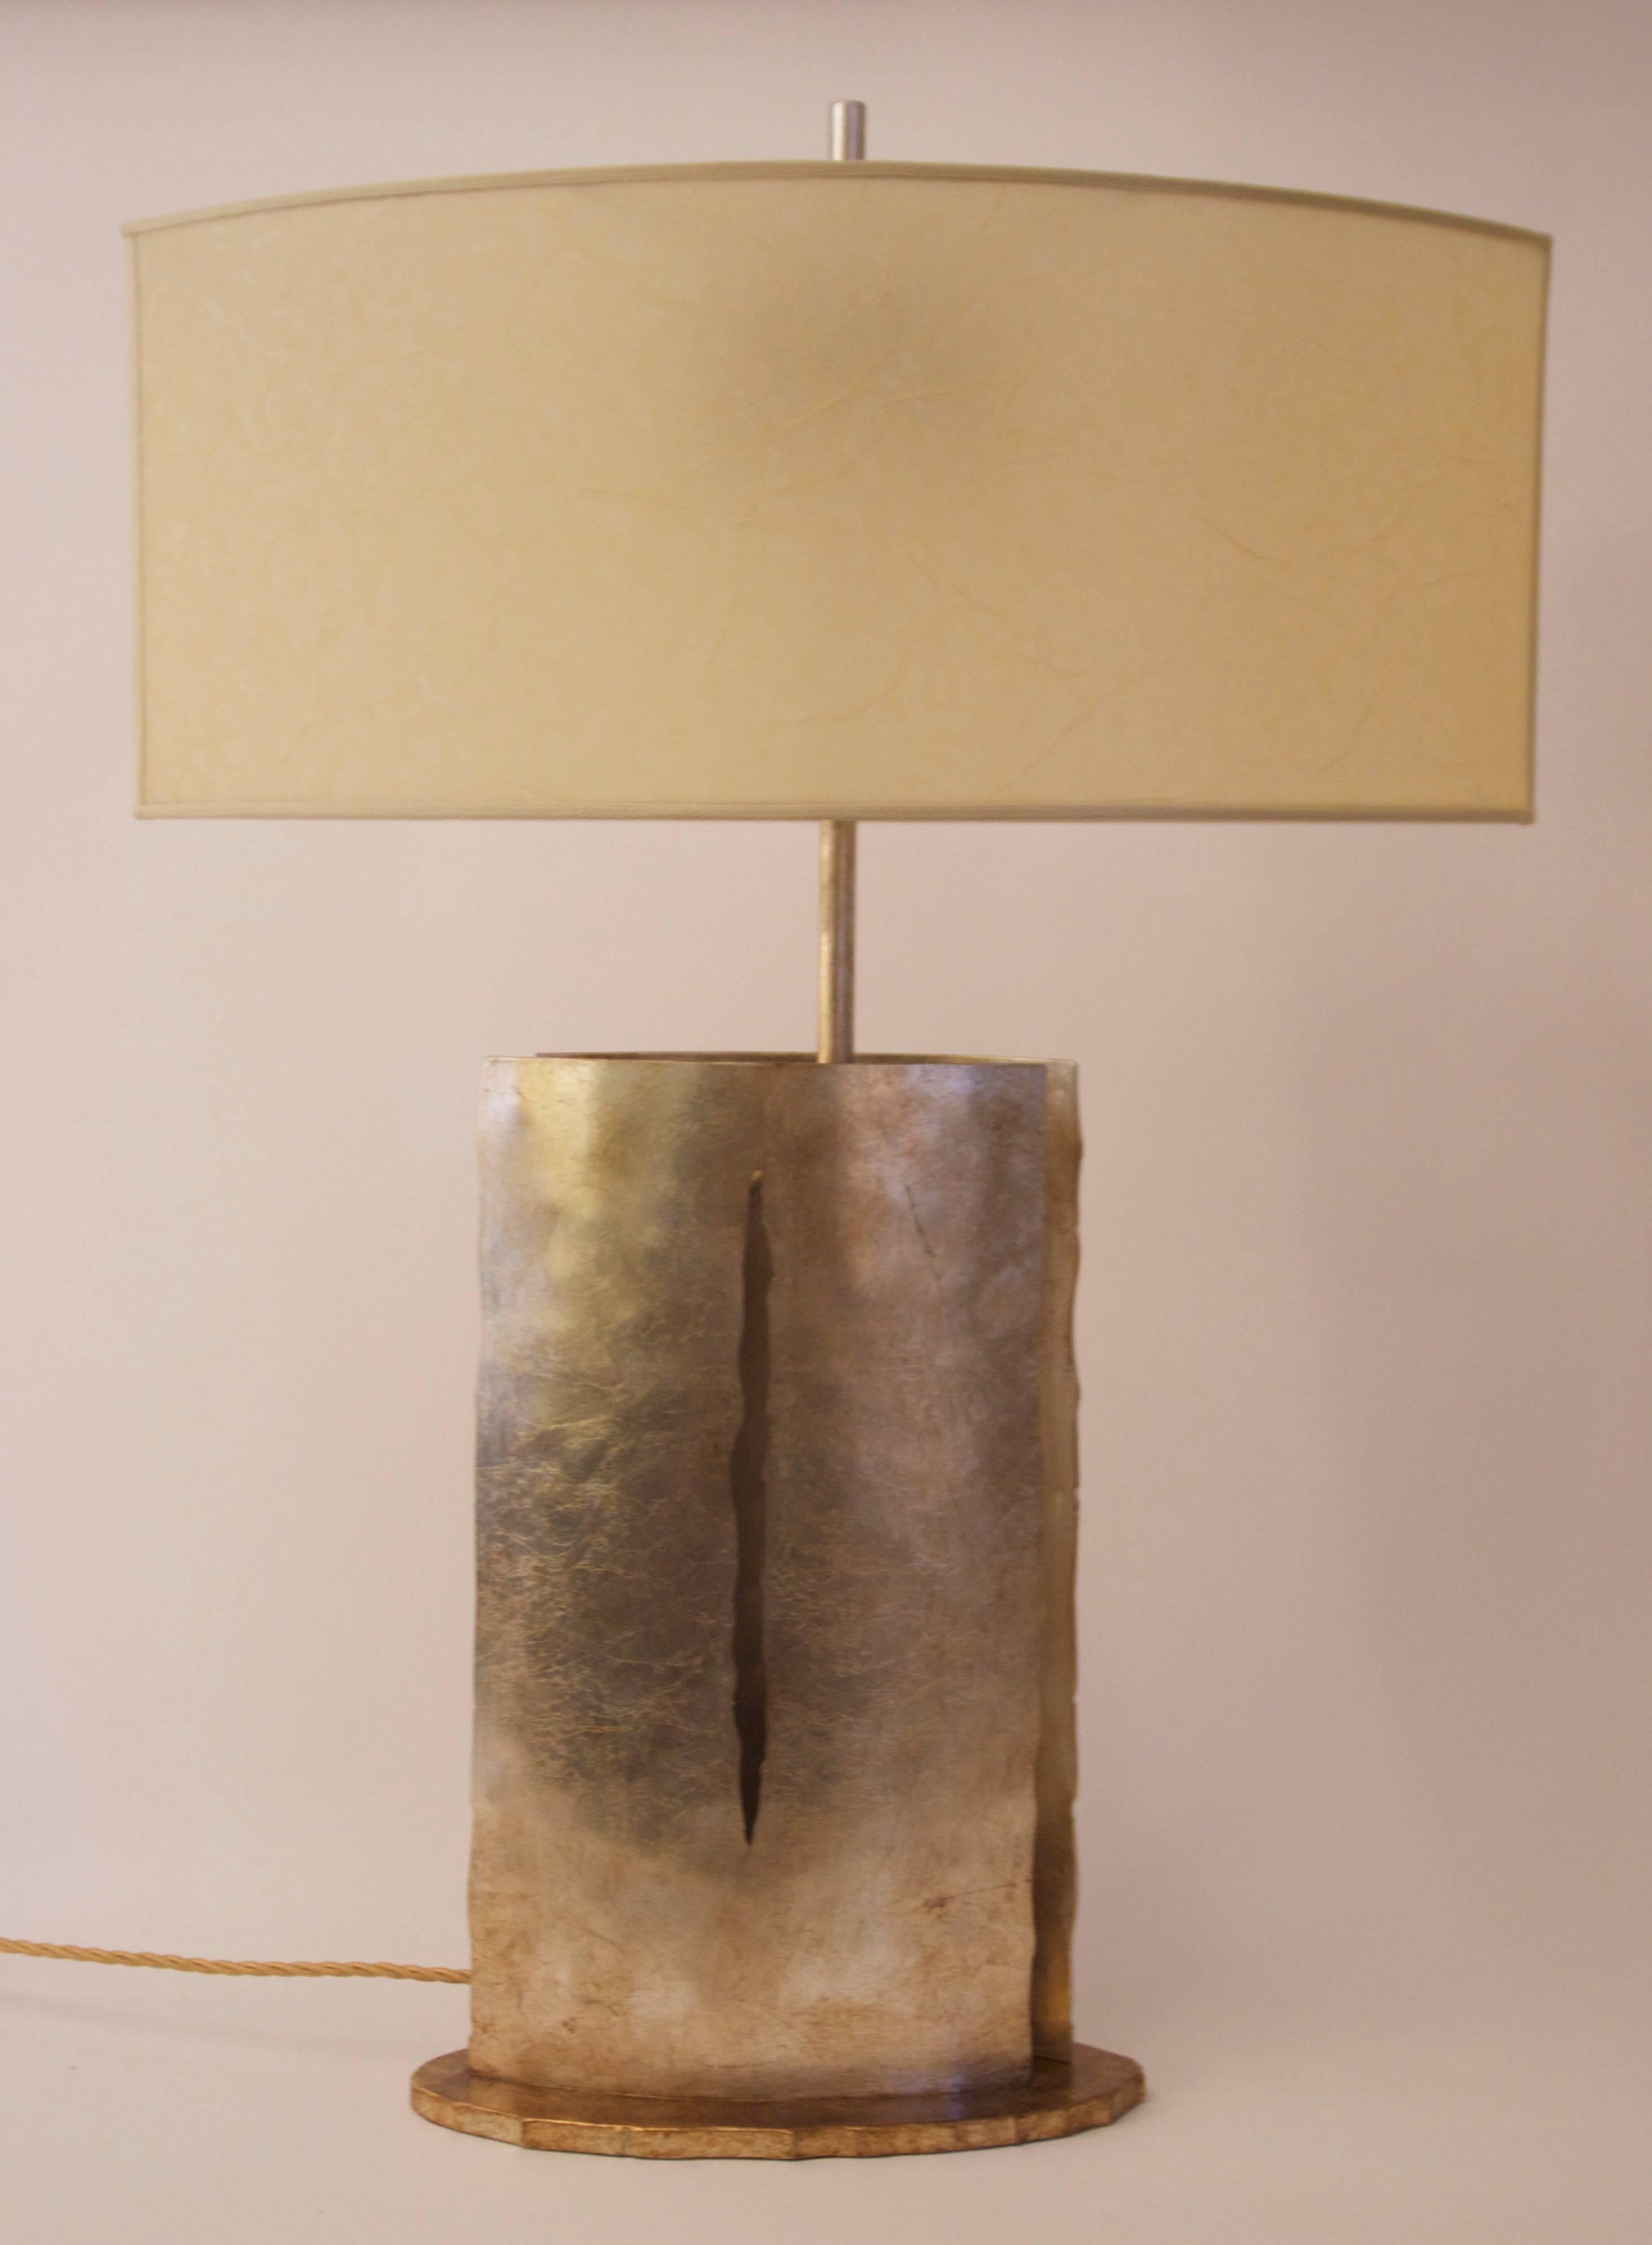 Angelo Brotto, pair of table lamps,
Esperia edition,
brass gilded,
circa 2000, Italy.
Measures: Height: 80 cm, base: 30 cm x 15 cm, diameter with lamp shade: 55 cm.